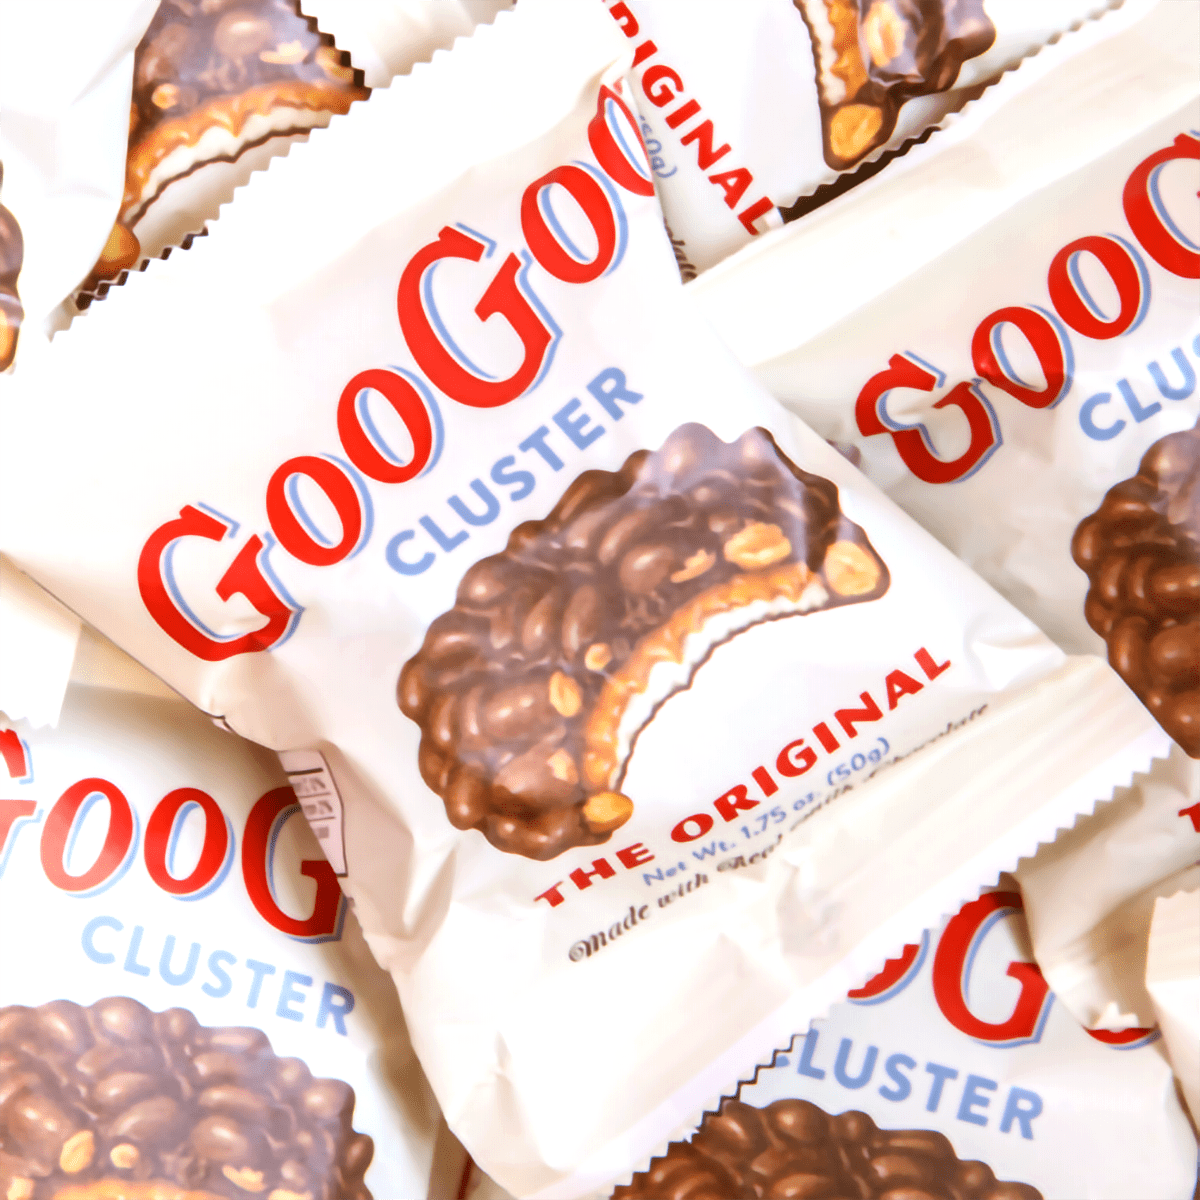 Goo Goo Clusters: What Are These Tennessee Treats + Where to Buy 'Em